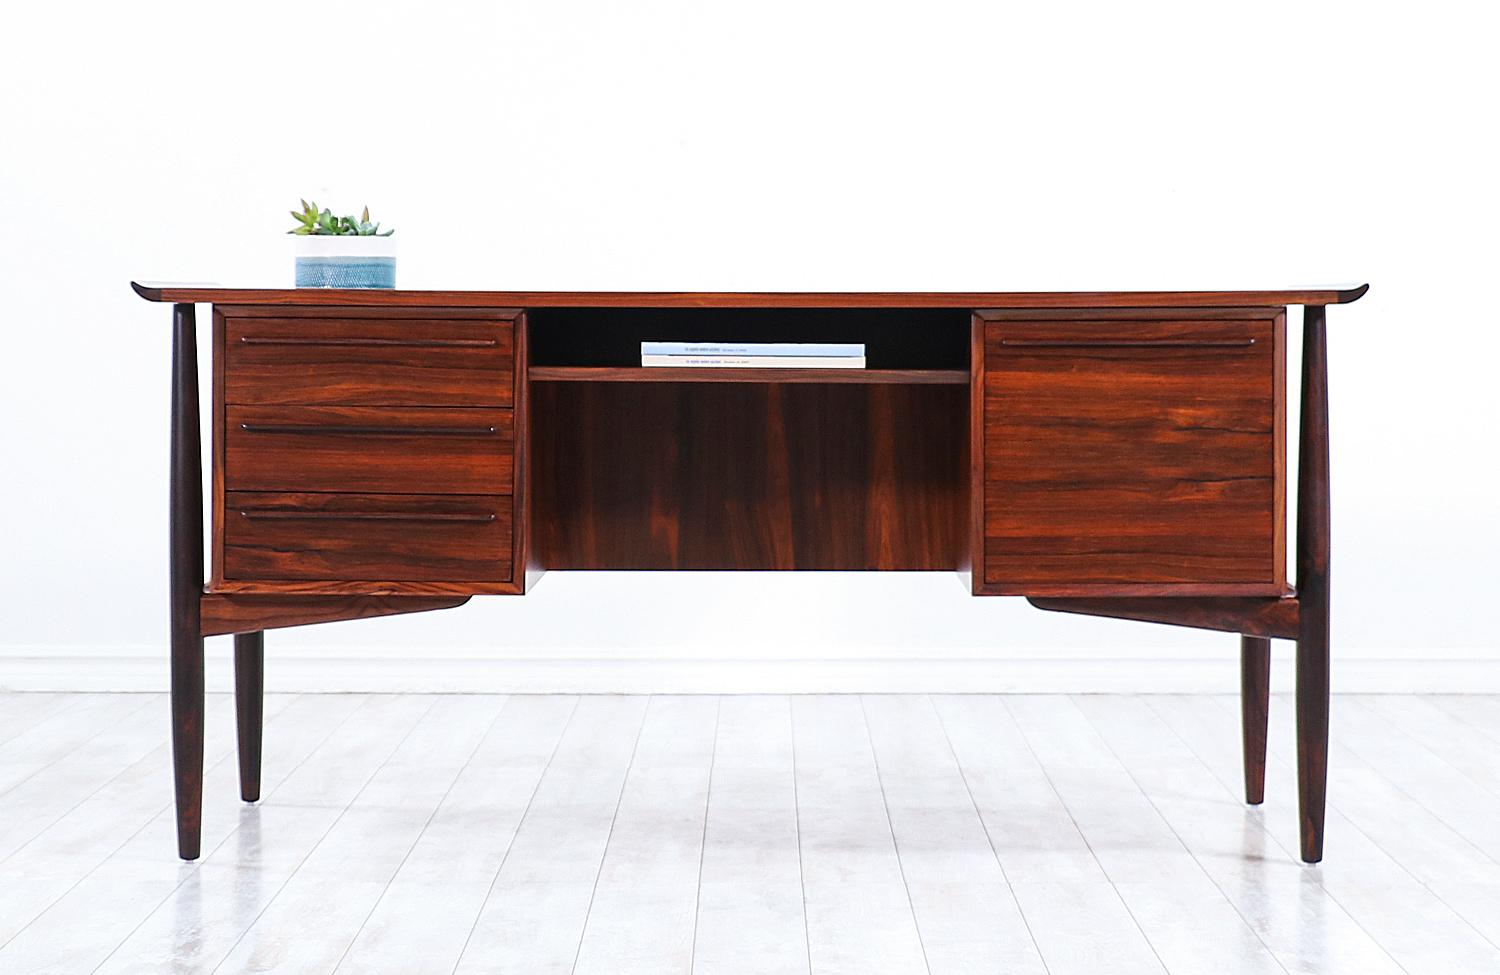 Vintage executive desk designed by Svend A. Madsen and handcrafted by H.P. Hansen Møbelindustri's workshop in Denmark, circa 1950s. This Danish Modern design is beautifully crafted in Brazilian rosewood and features three spacious drawers on the